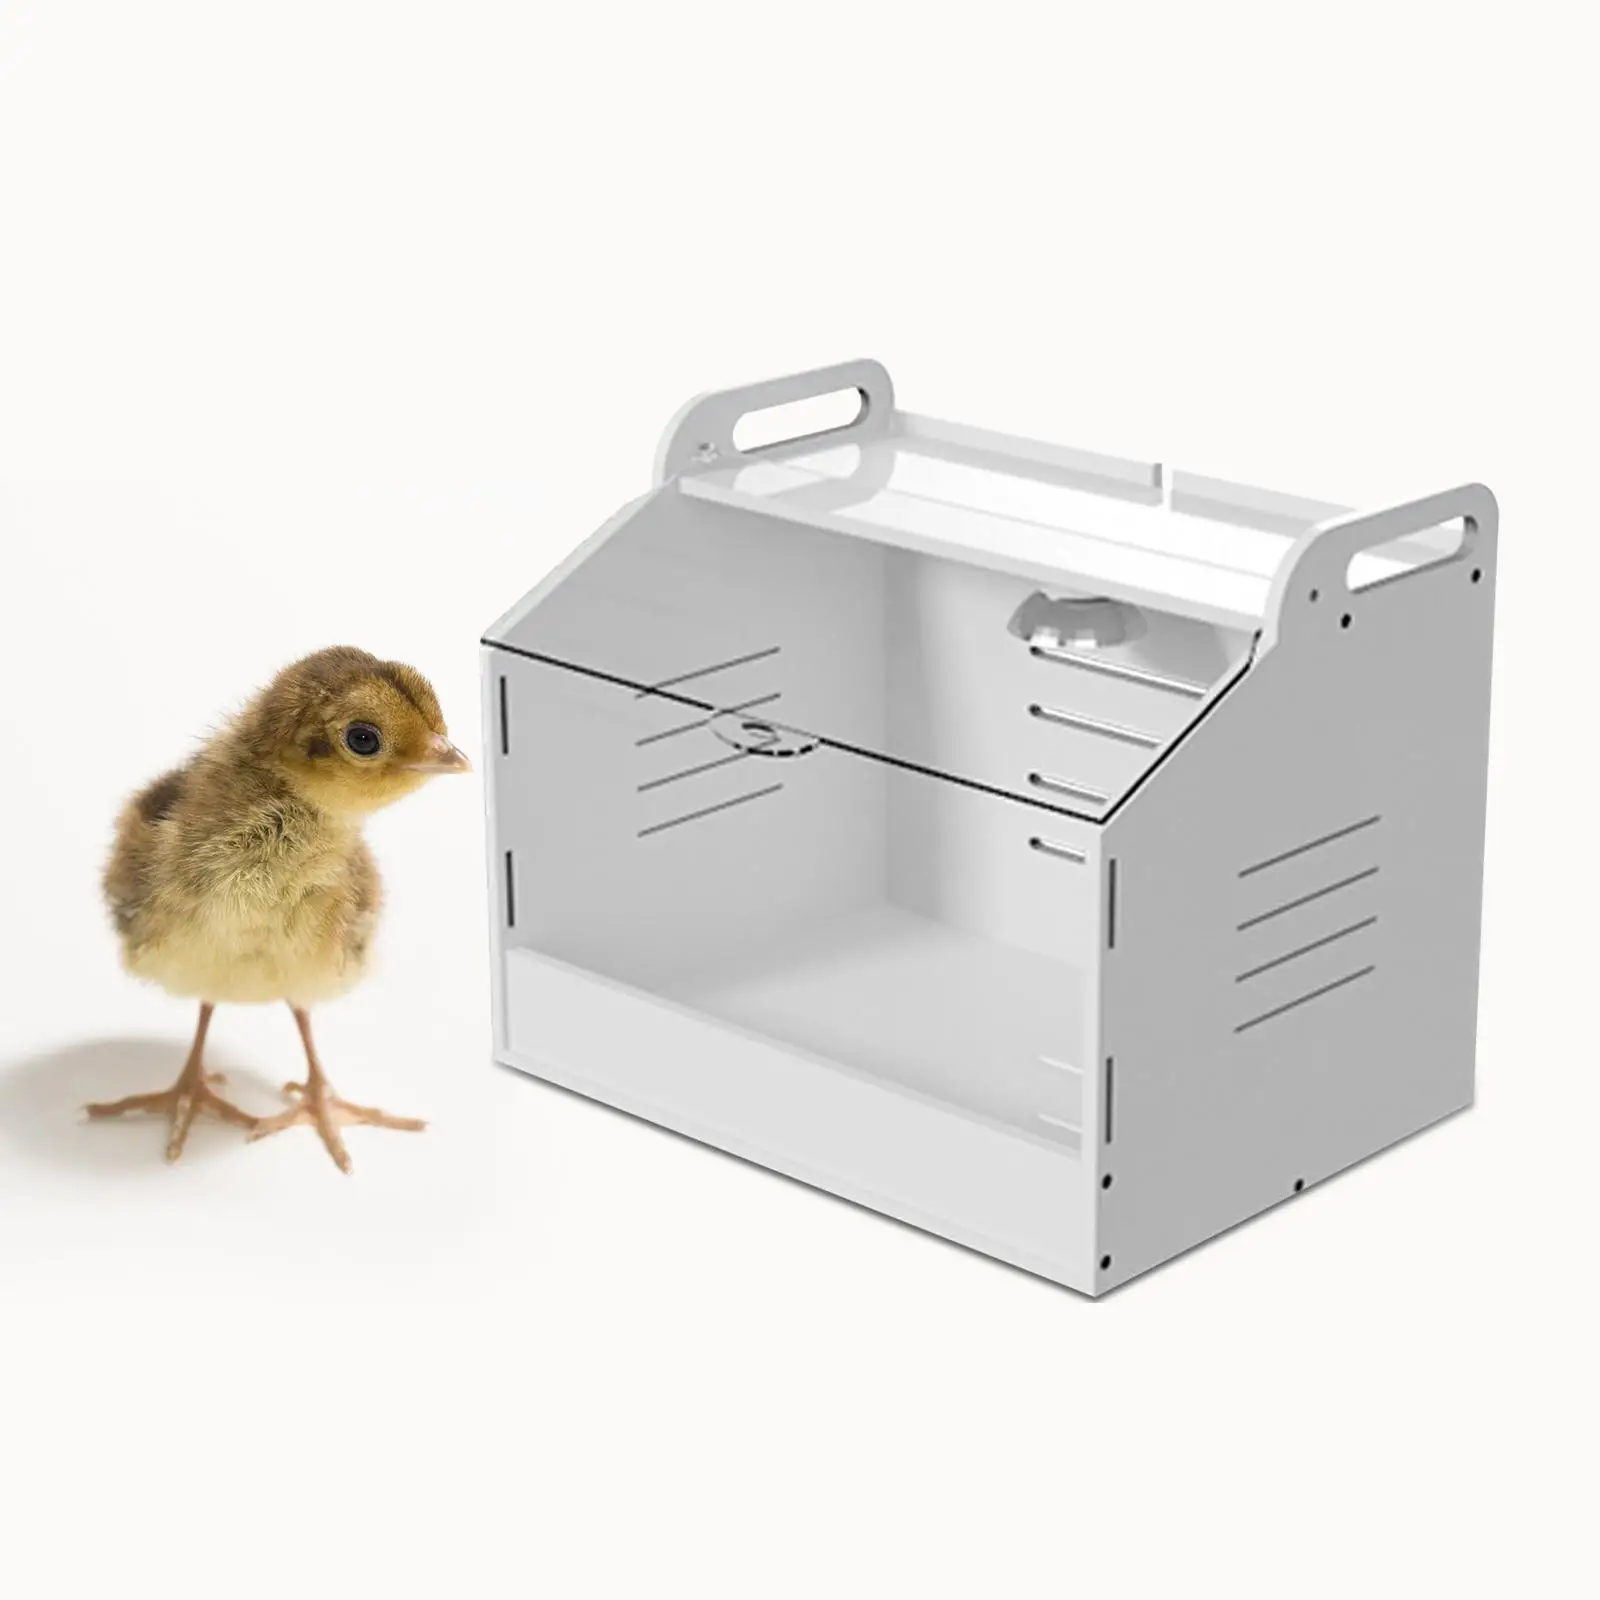 Egg Incubator Hatching High Temperature Clear Top Cover Incubation Box Automatic Poultry Hatcher Machine for Brooding Turkey